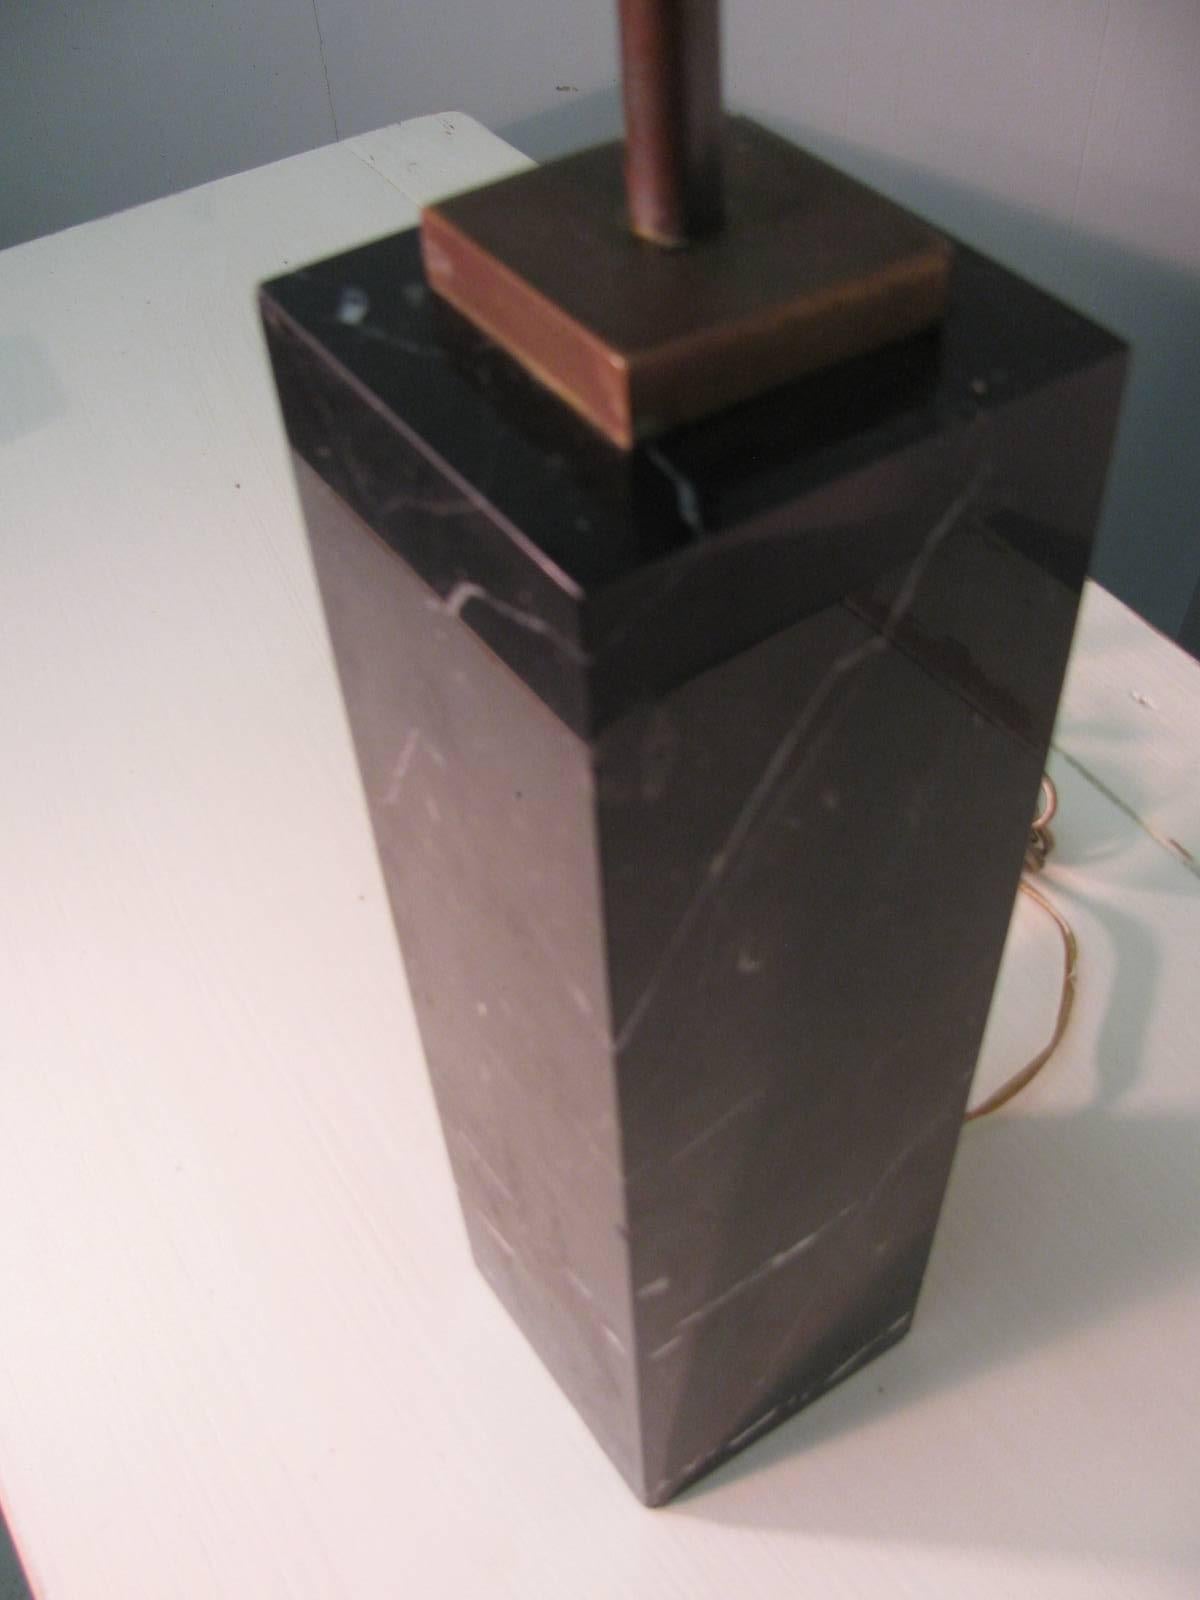 Simple and elegant square block of polished black marble. Marble has great veining. Original brass fittings with double socket for adequate lighting. Designed by T.H. Robsjohn Gibbings for Hansen Lamps N.Y. and was electrified by Beekman Hill